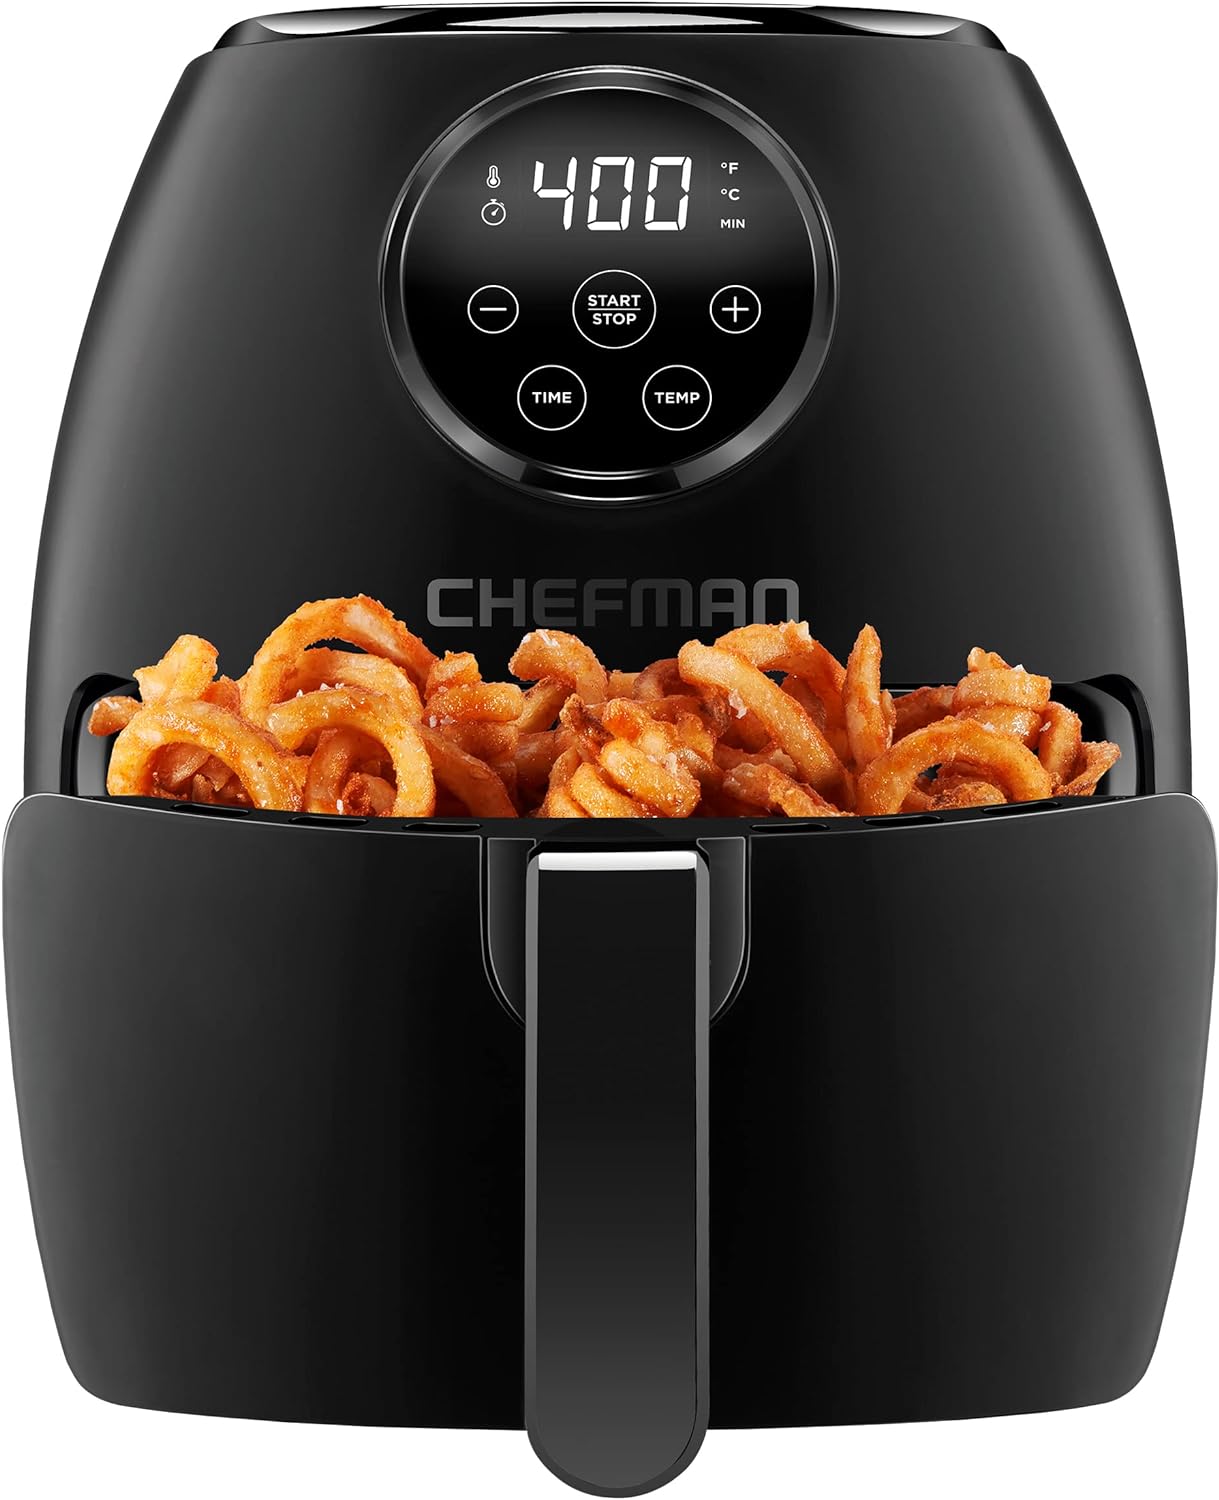 This is an awesome air fryer. So easy to use & to clean. I bought the 3.6, so Im glad I didnt go with the smaller one since this is a perfect size. Ive made fries, chicken and broccoli in it. Cant wait to make more. I would suggest getting liners for it since no mess afterwards.